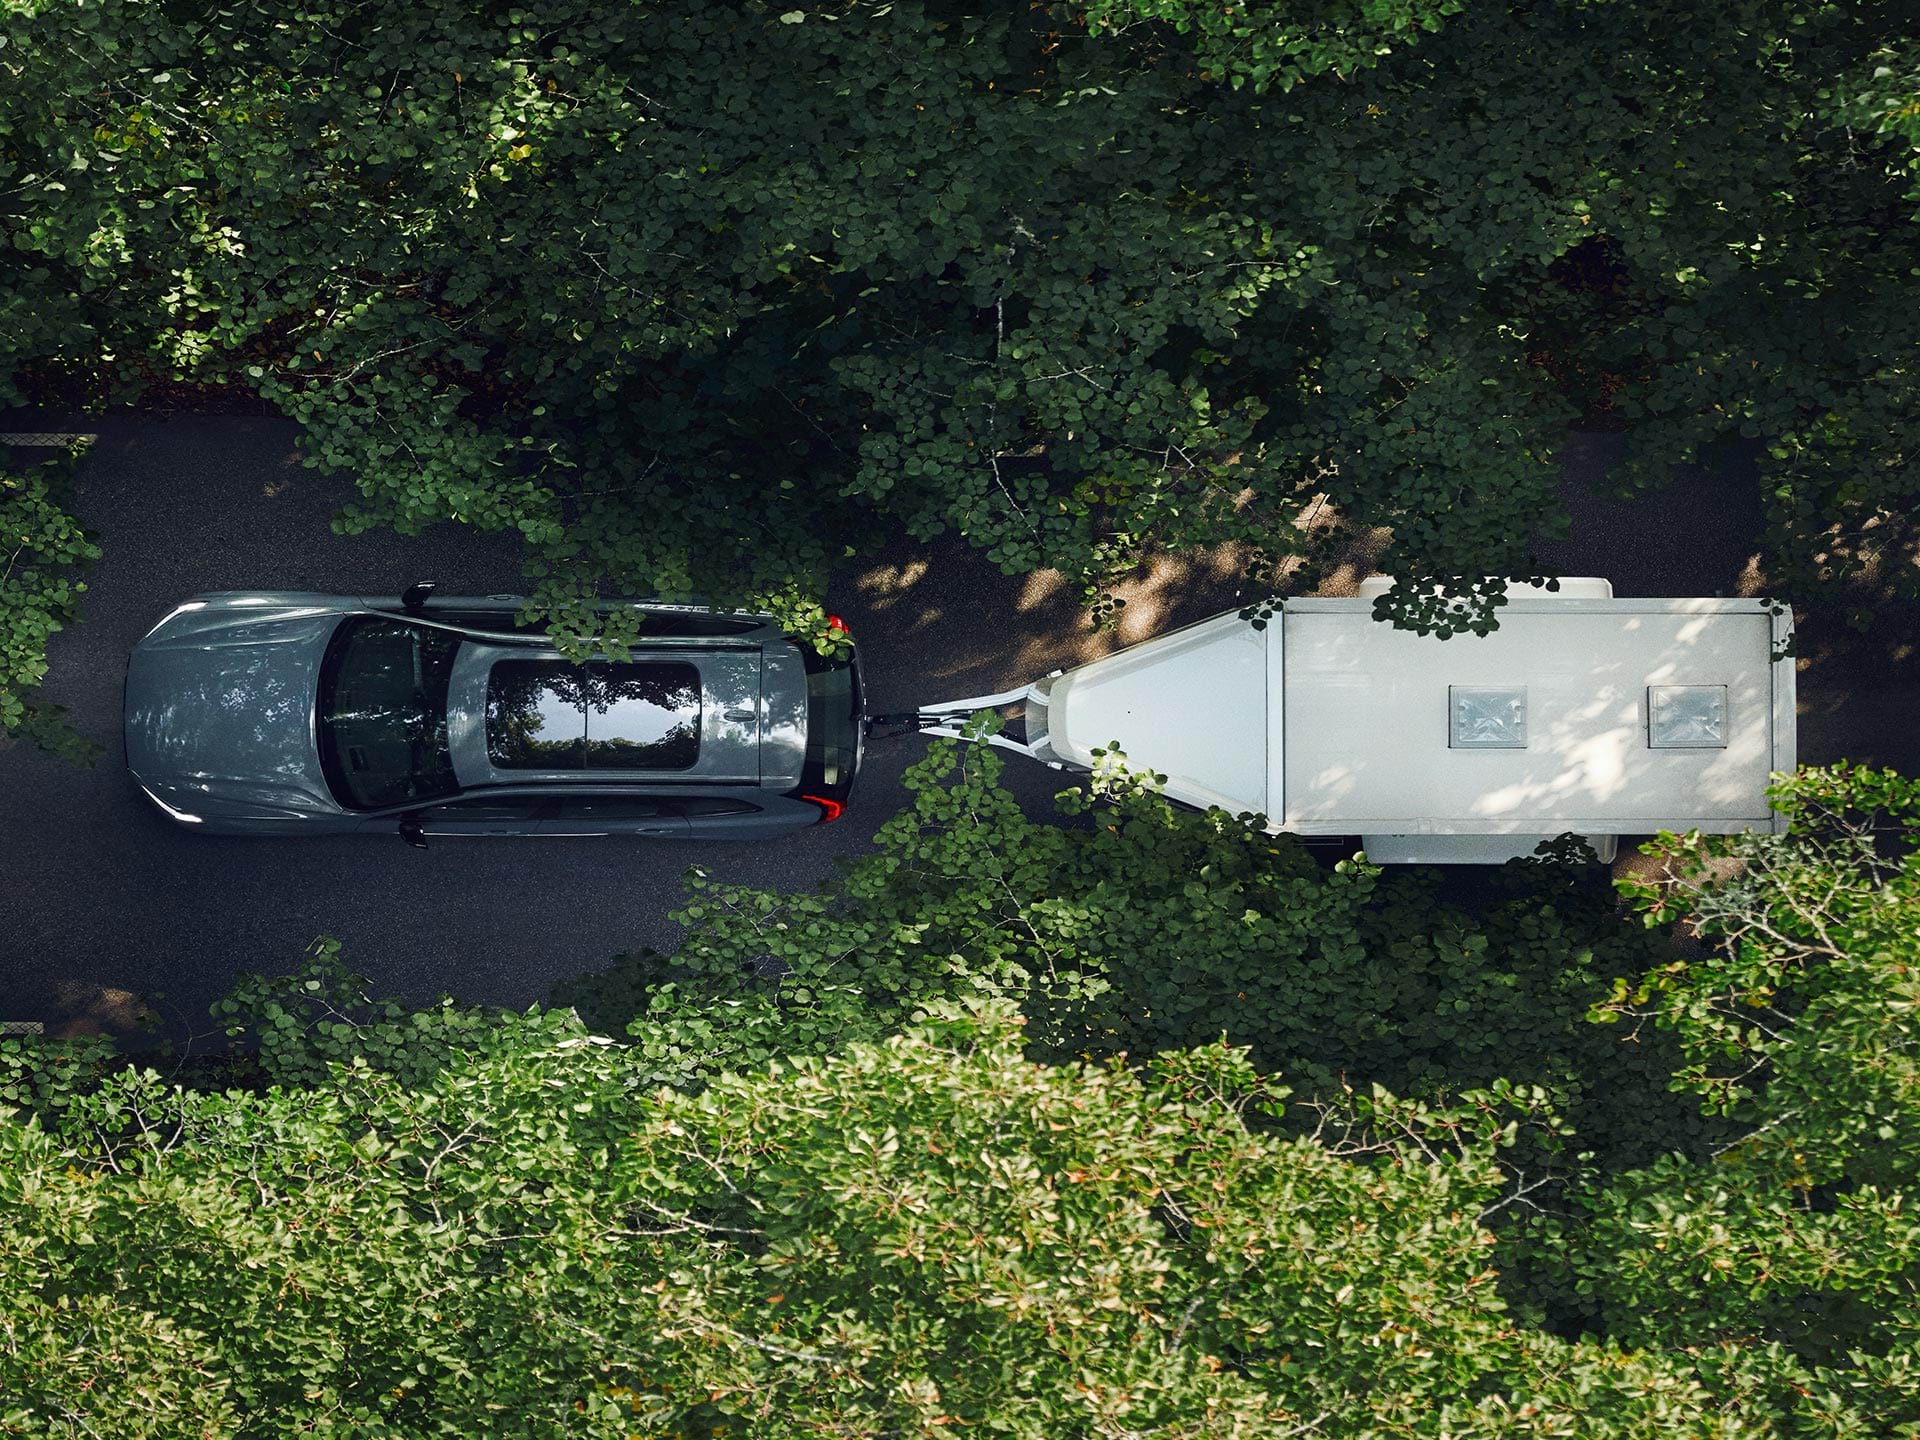 Bird's-eye view of a Volvo SUV towing a white trailer along a leafy road on a sunny day.